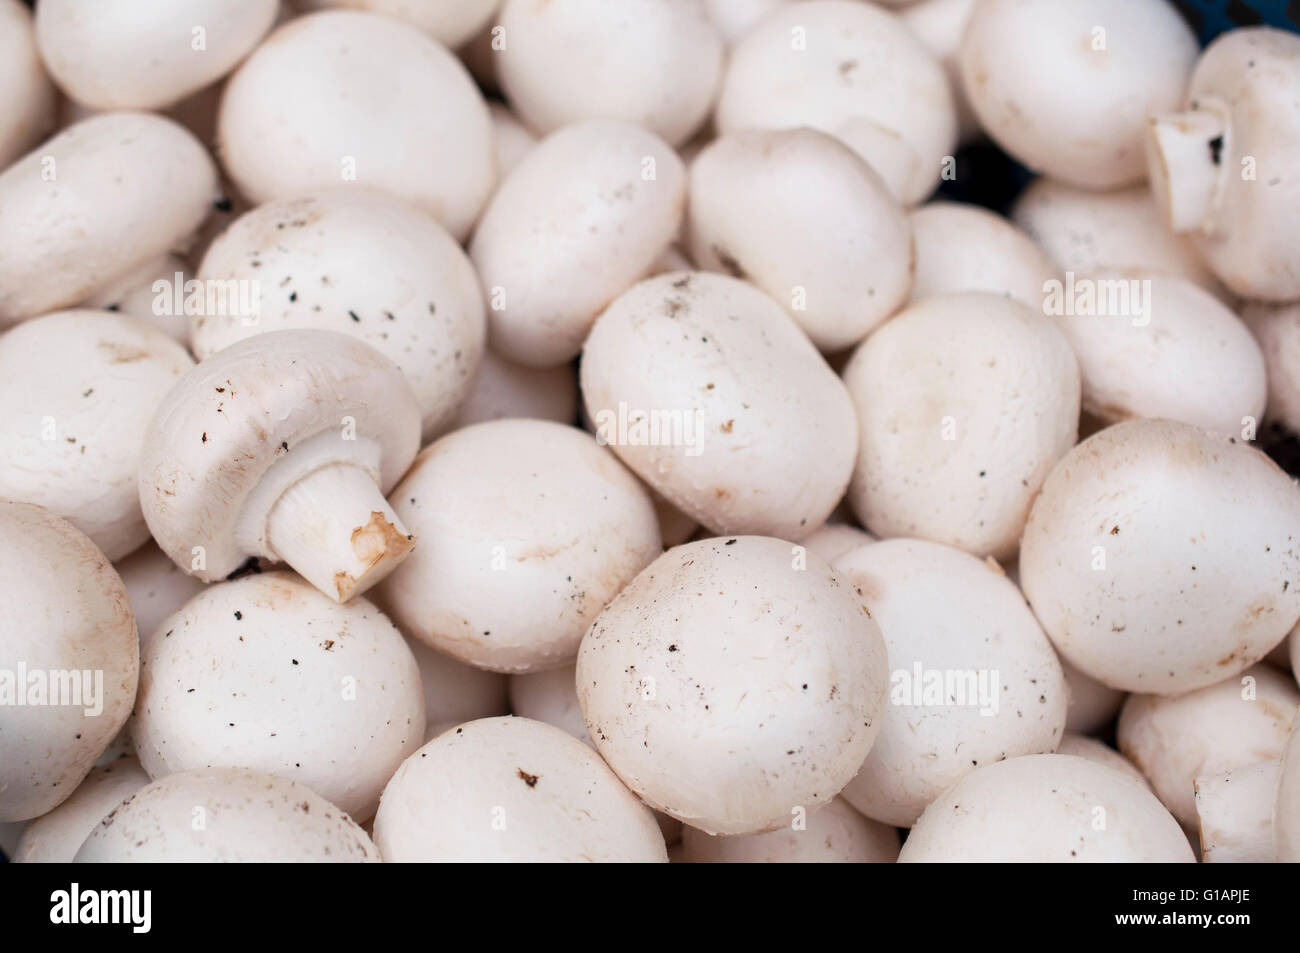 Mushrooms for sale in a local market Stock Photo